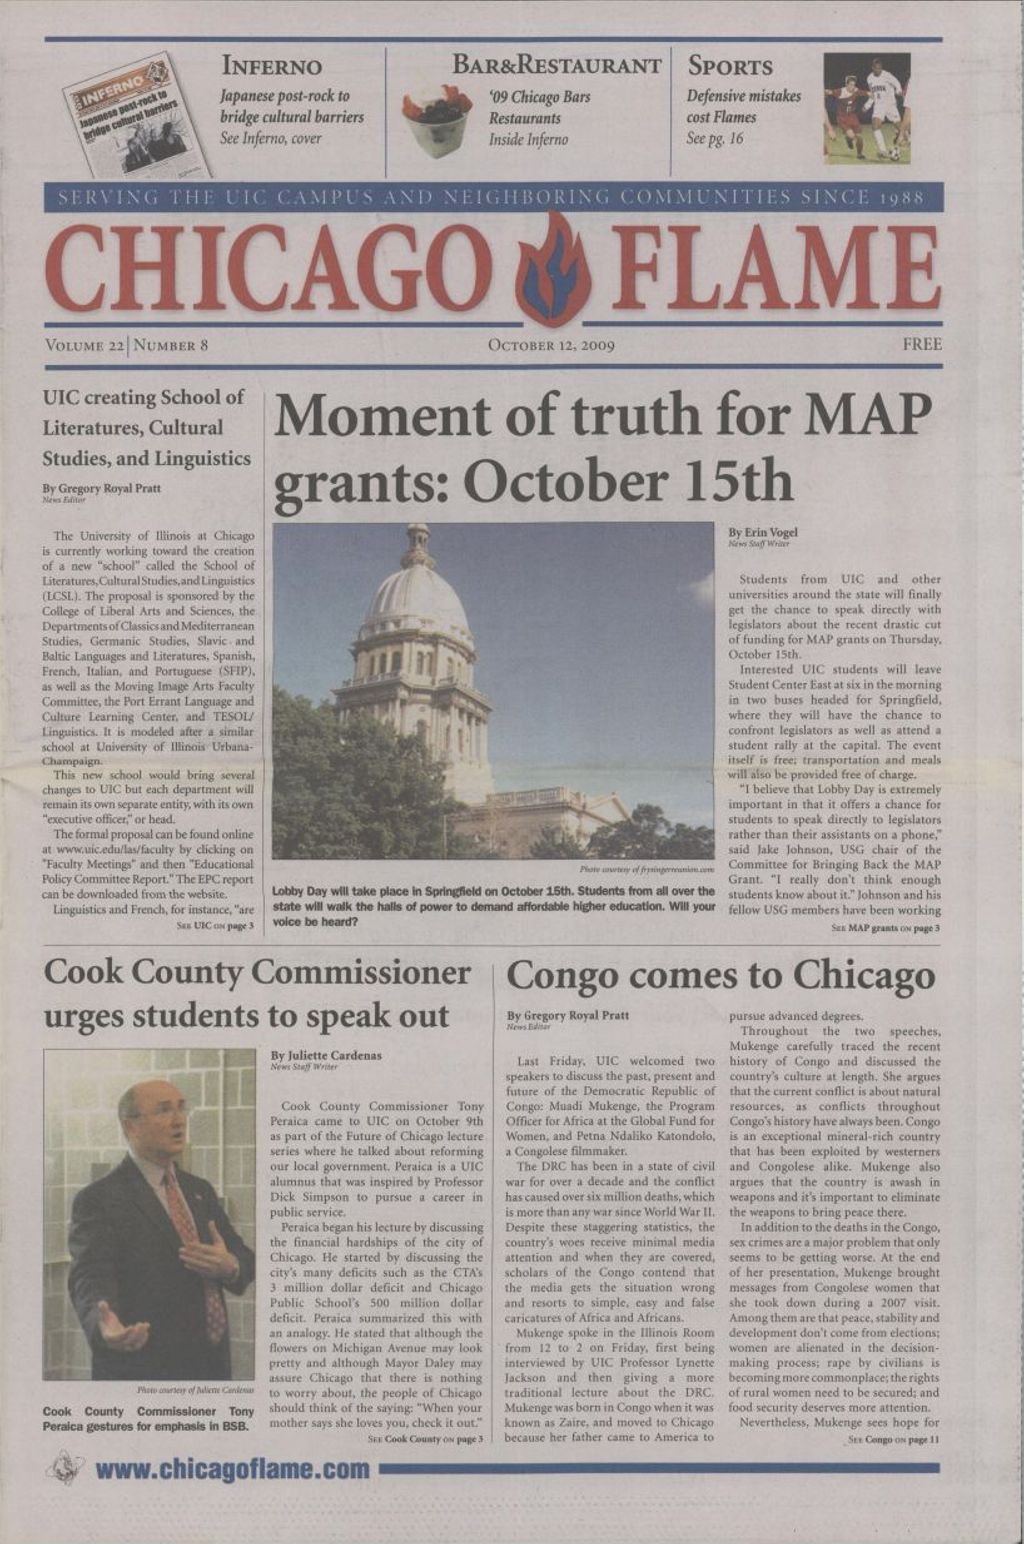 Chicago Flame (October 12, 2009)